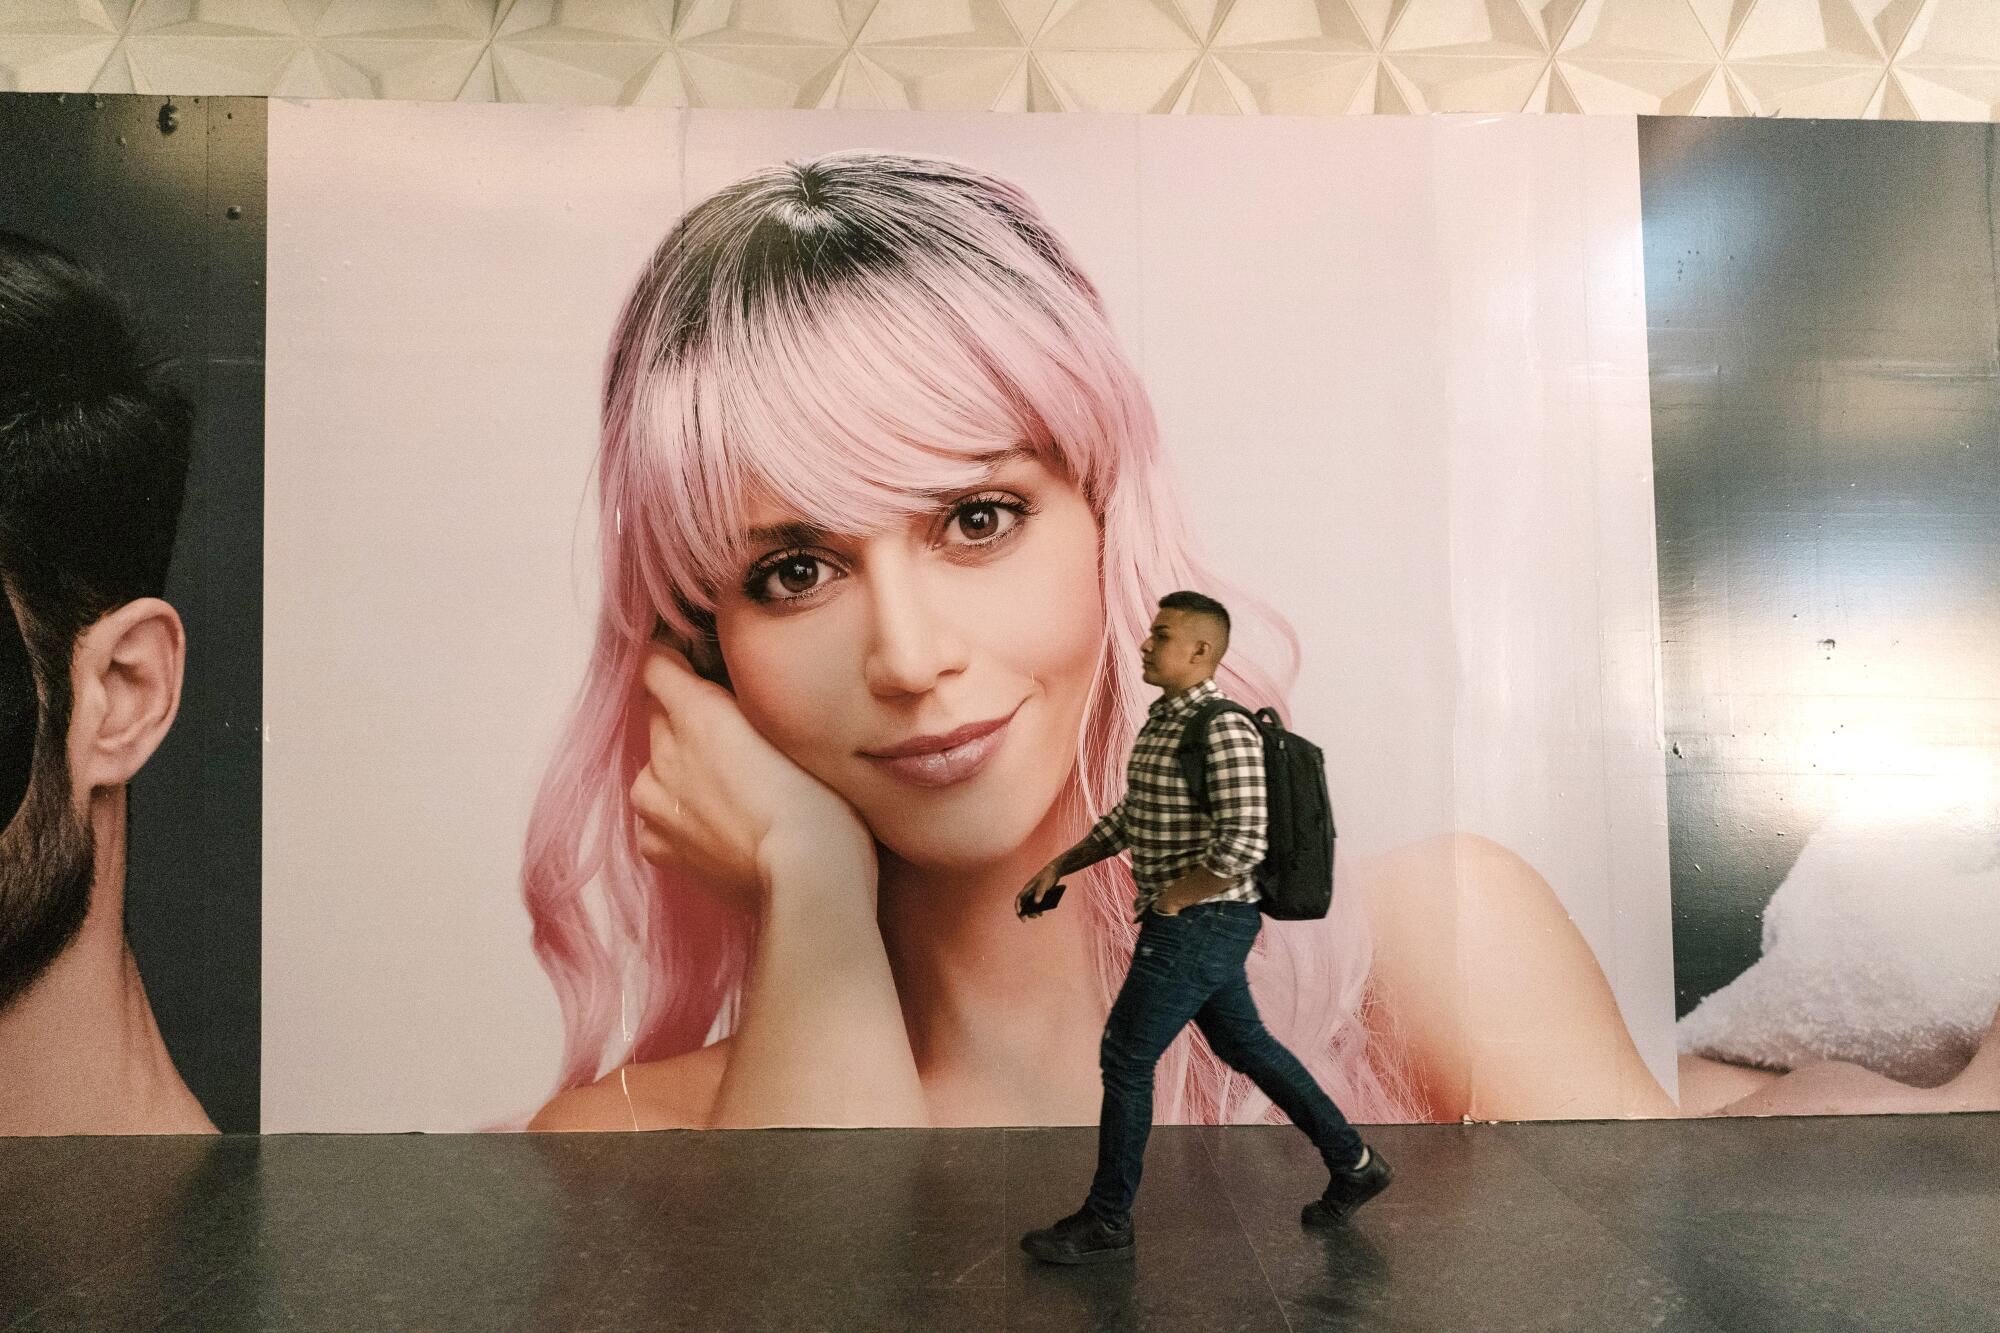 A man walks by a large ad depicting a blond woman 